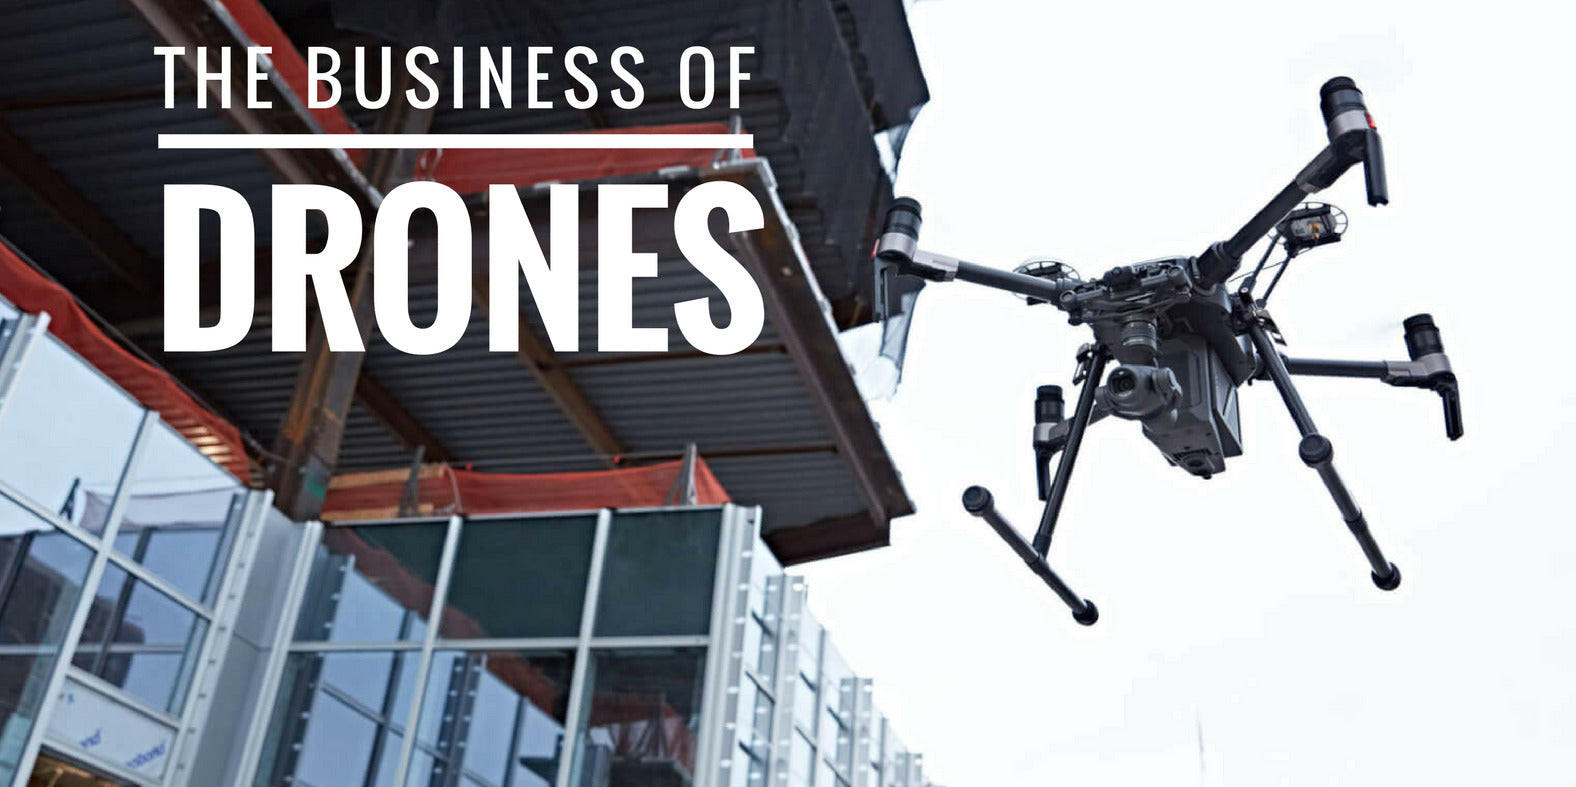 The Business of Drones: DJI, Yuneec, and 3DR